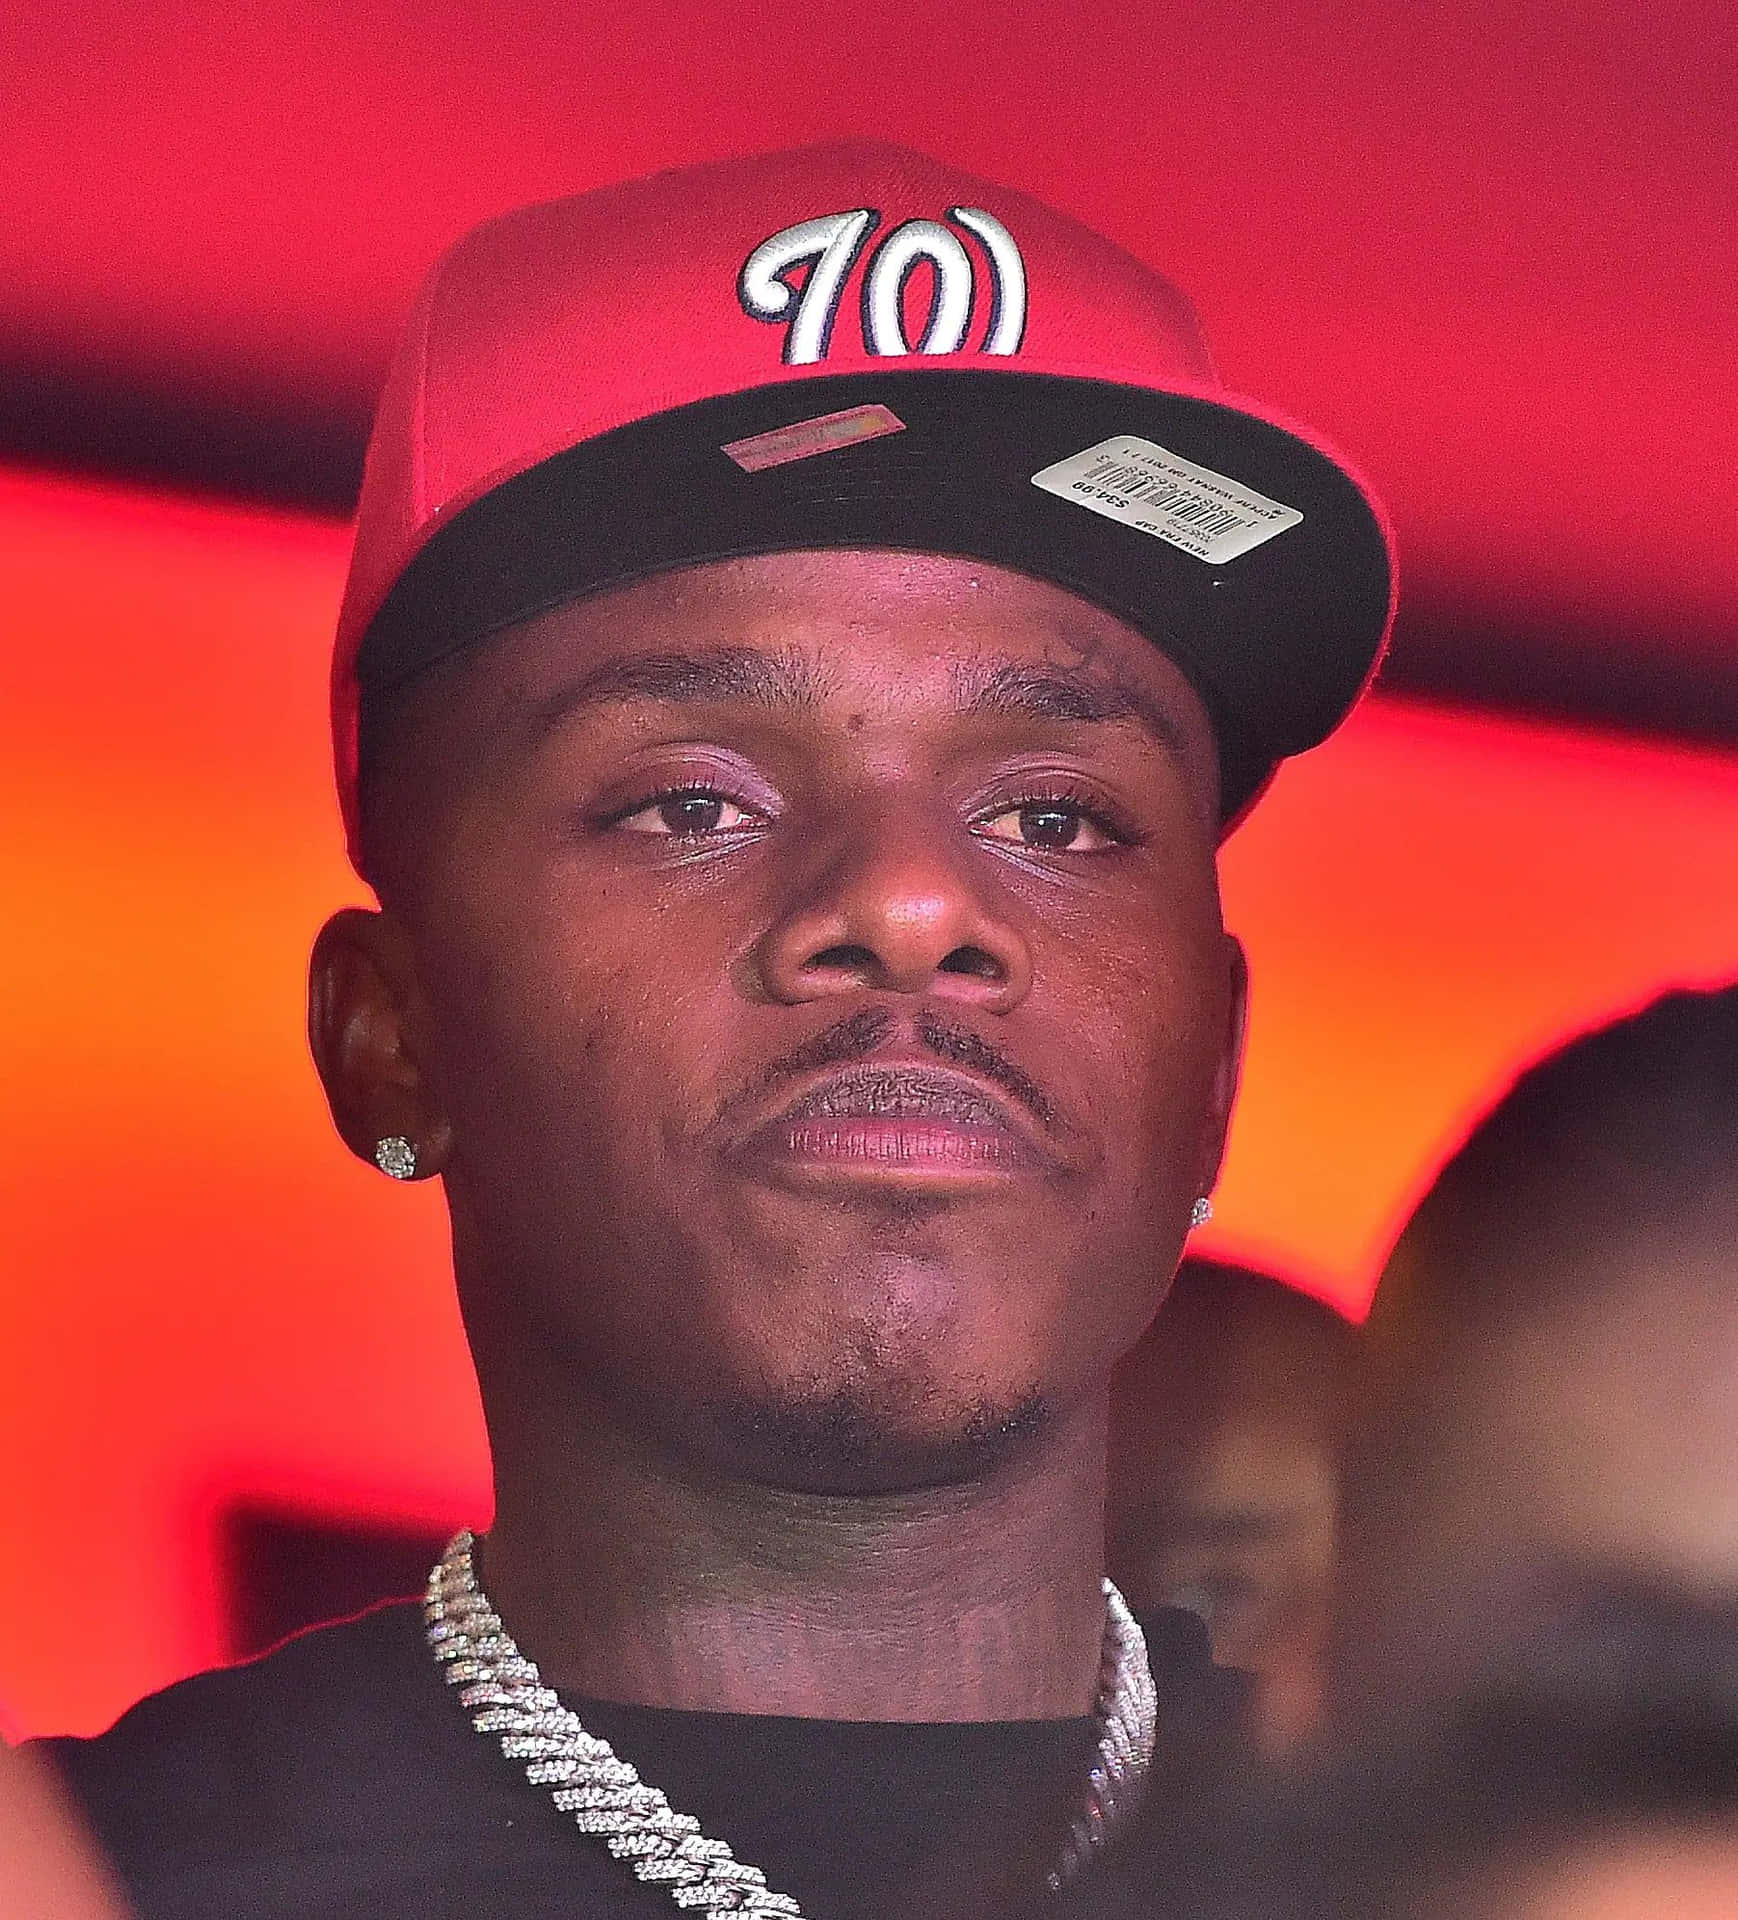 DaBaby performing live on stage, with an energetic and vibrant background